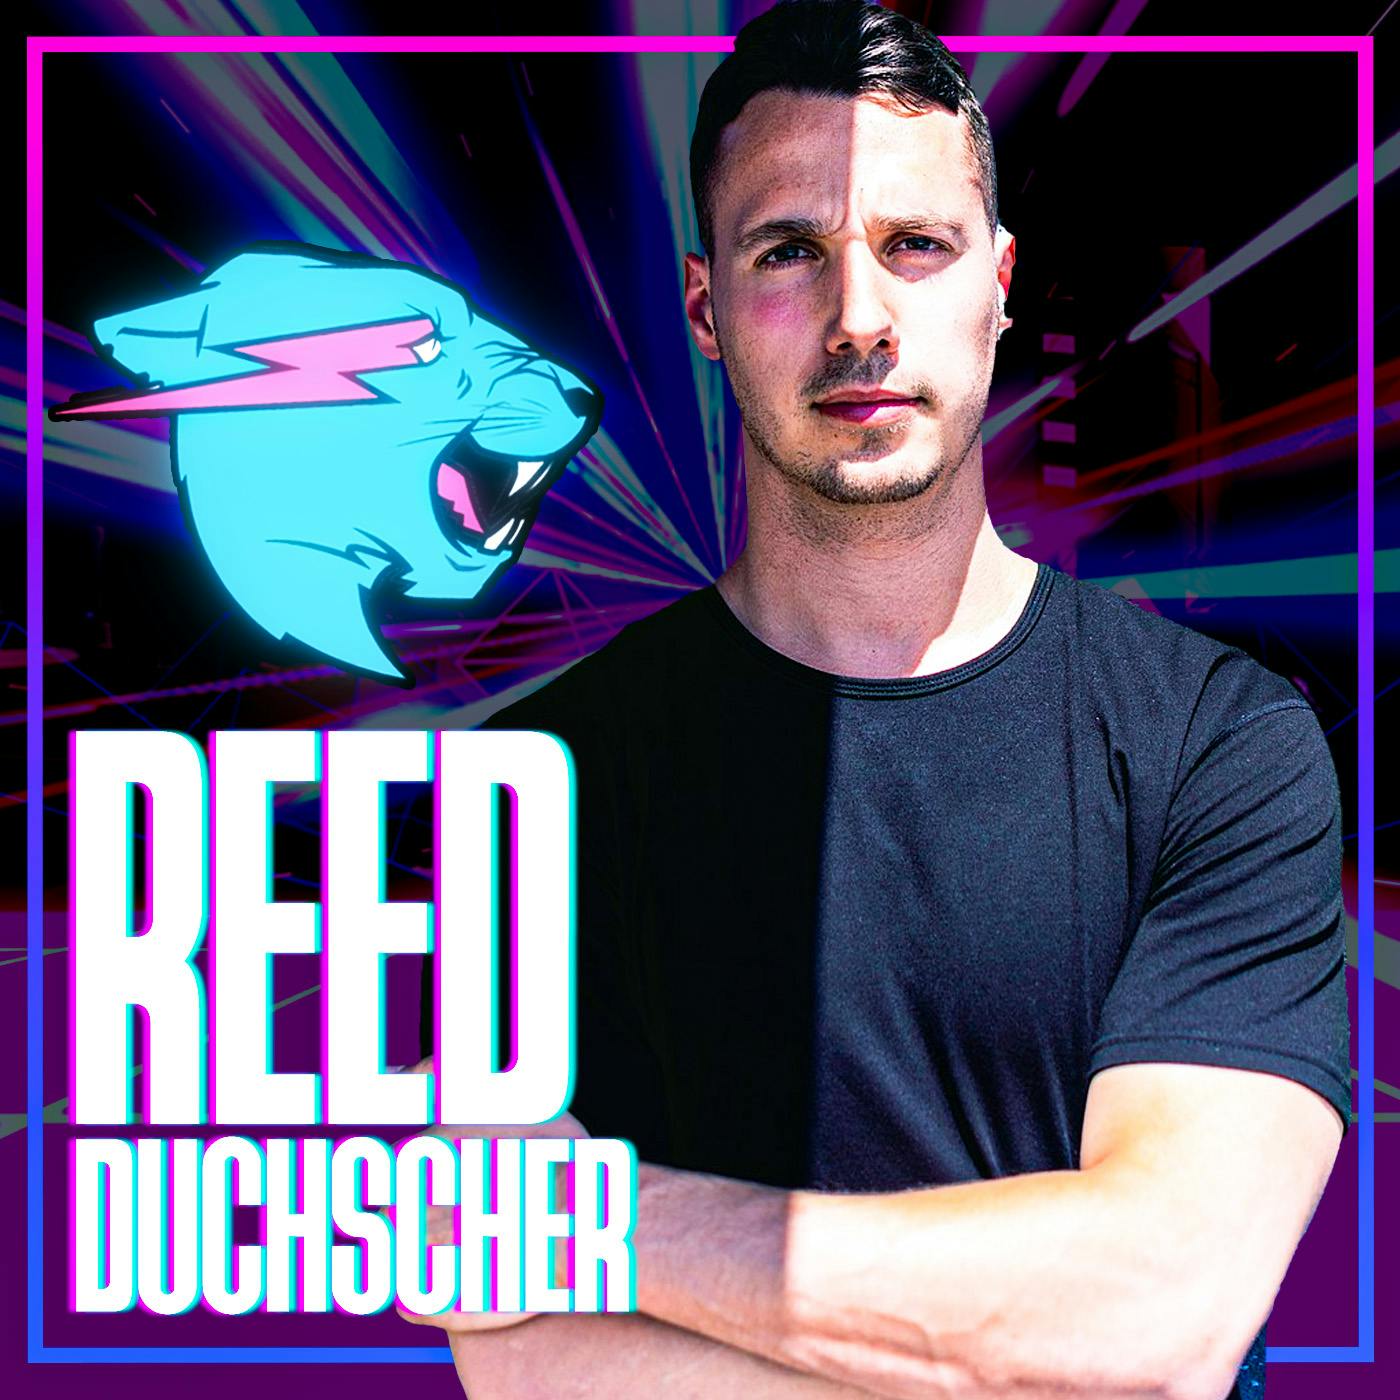 Managing Success with Reed Duchscher